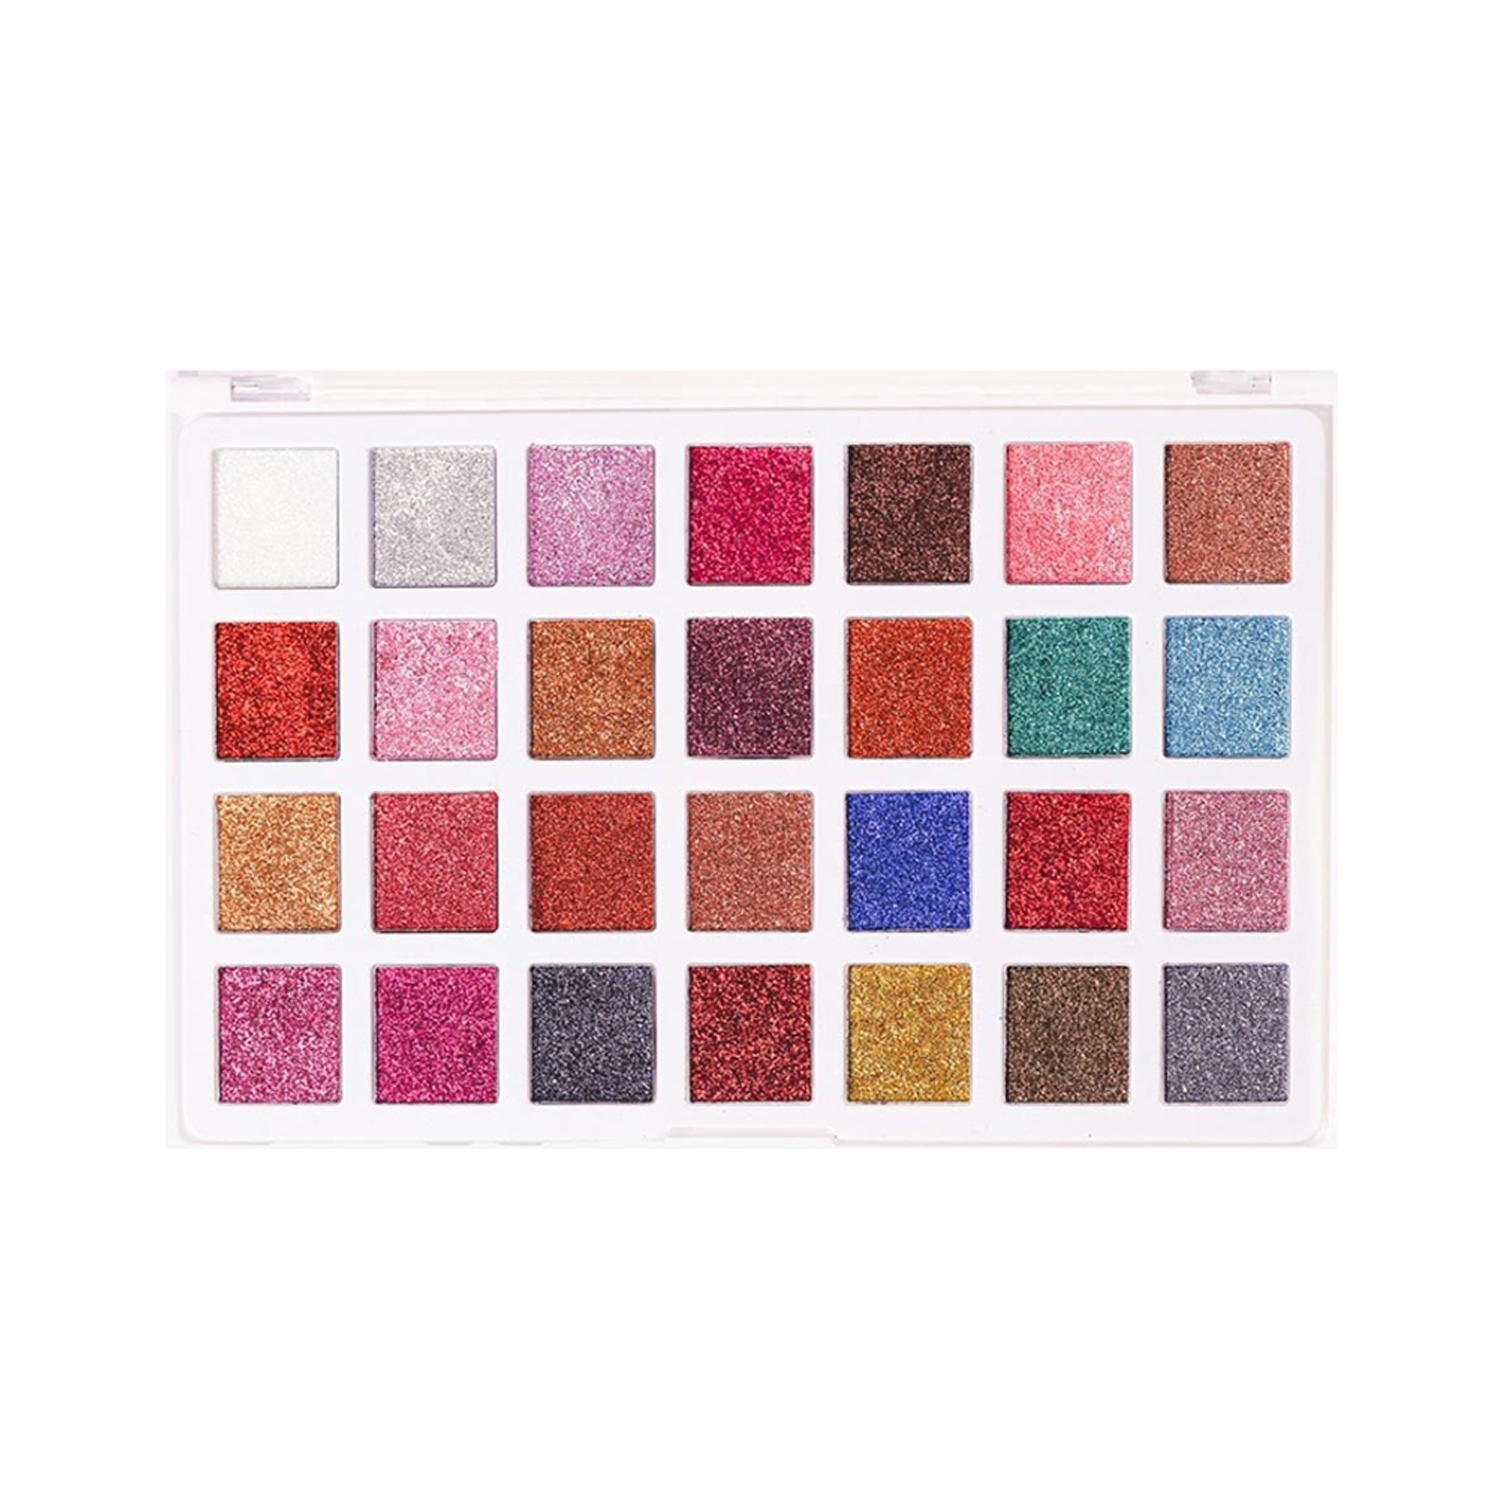 Pigment Play | Pigment Play Rainbow Glow Max Effect Glitter Palette - One Love (50g)